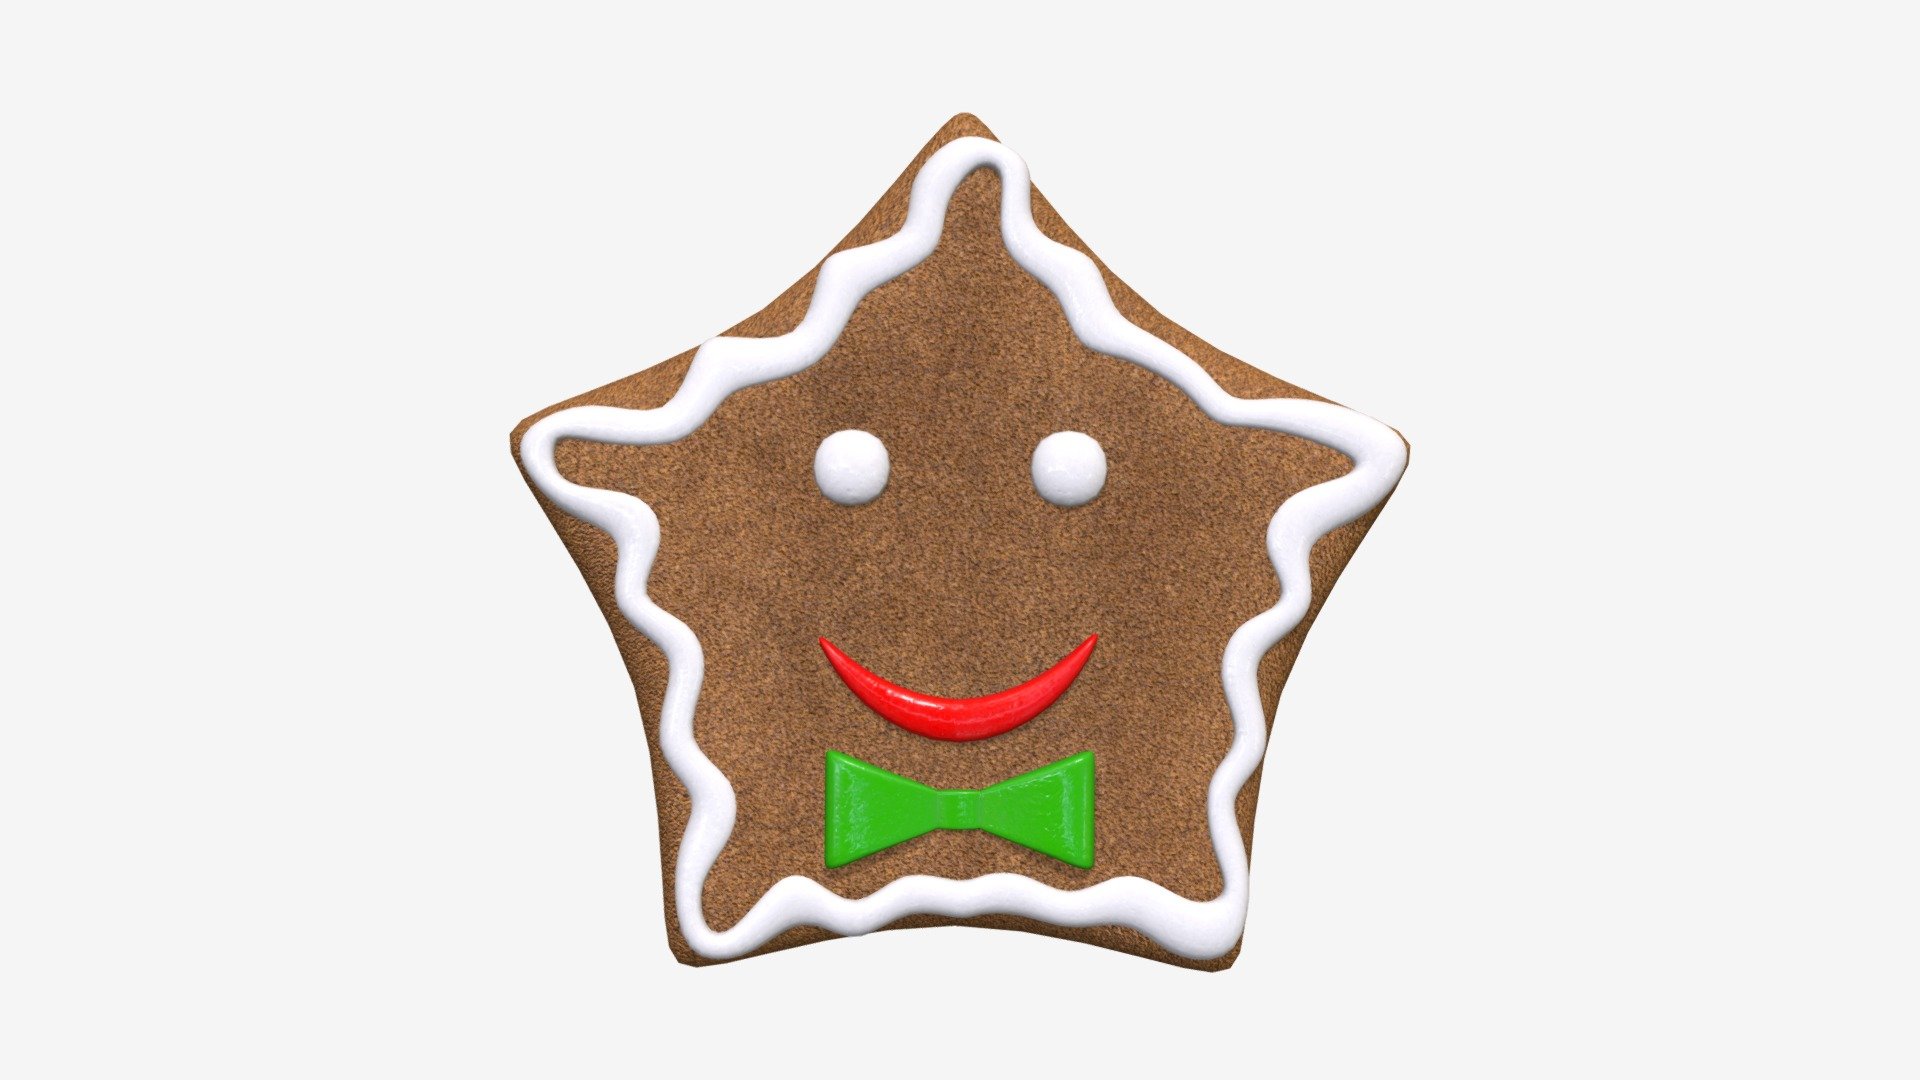 Created in 3ds max 2016
Saved to 3ds max 2013
Units: Centimeters
Dimension: 6.76 x 6.44 x 1.02
Polys: 7904
XForm: Yes
Box Trick: No
Model Parts: 1 - Gingerbread cookie 015 - Buy Royalty Free 3D model by HQ3DMOD (@AivisAstics) 3d model